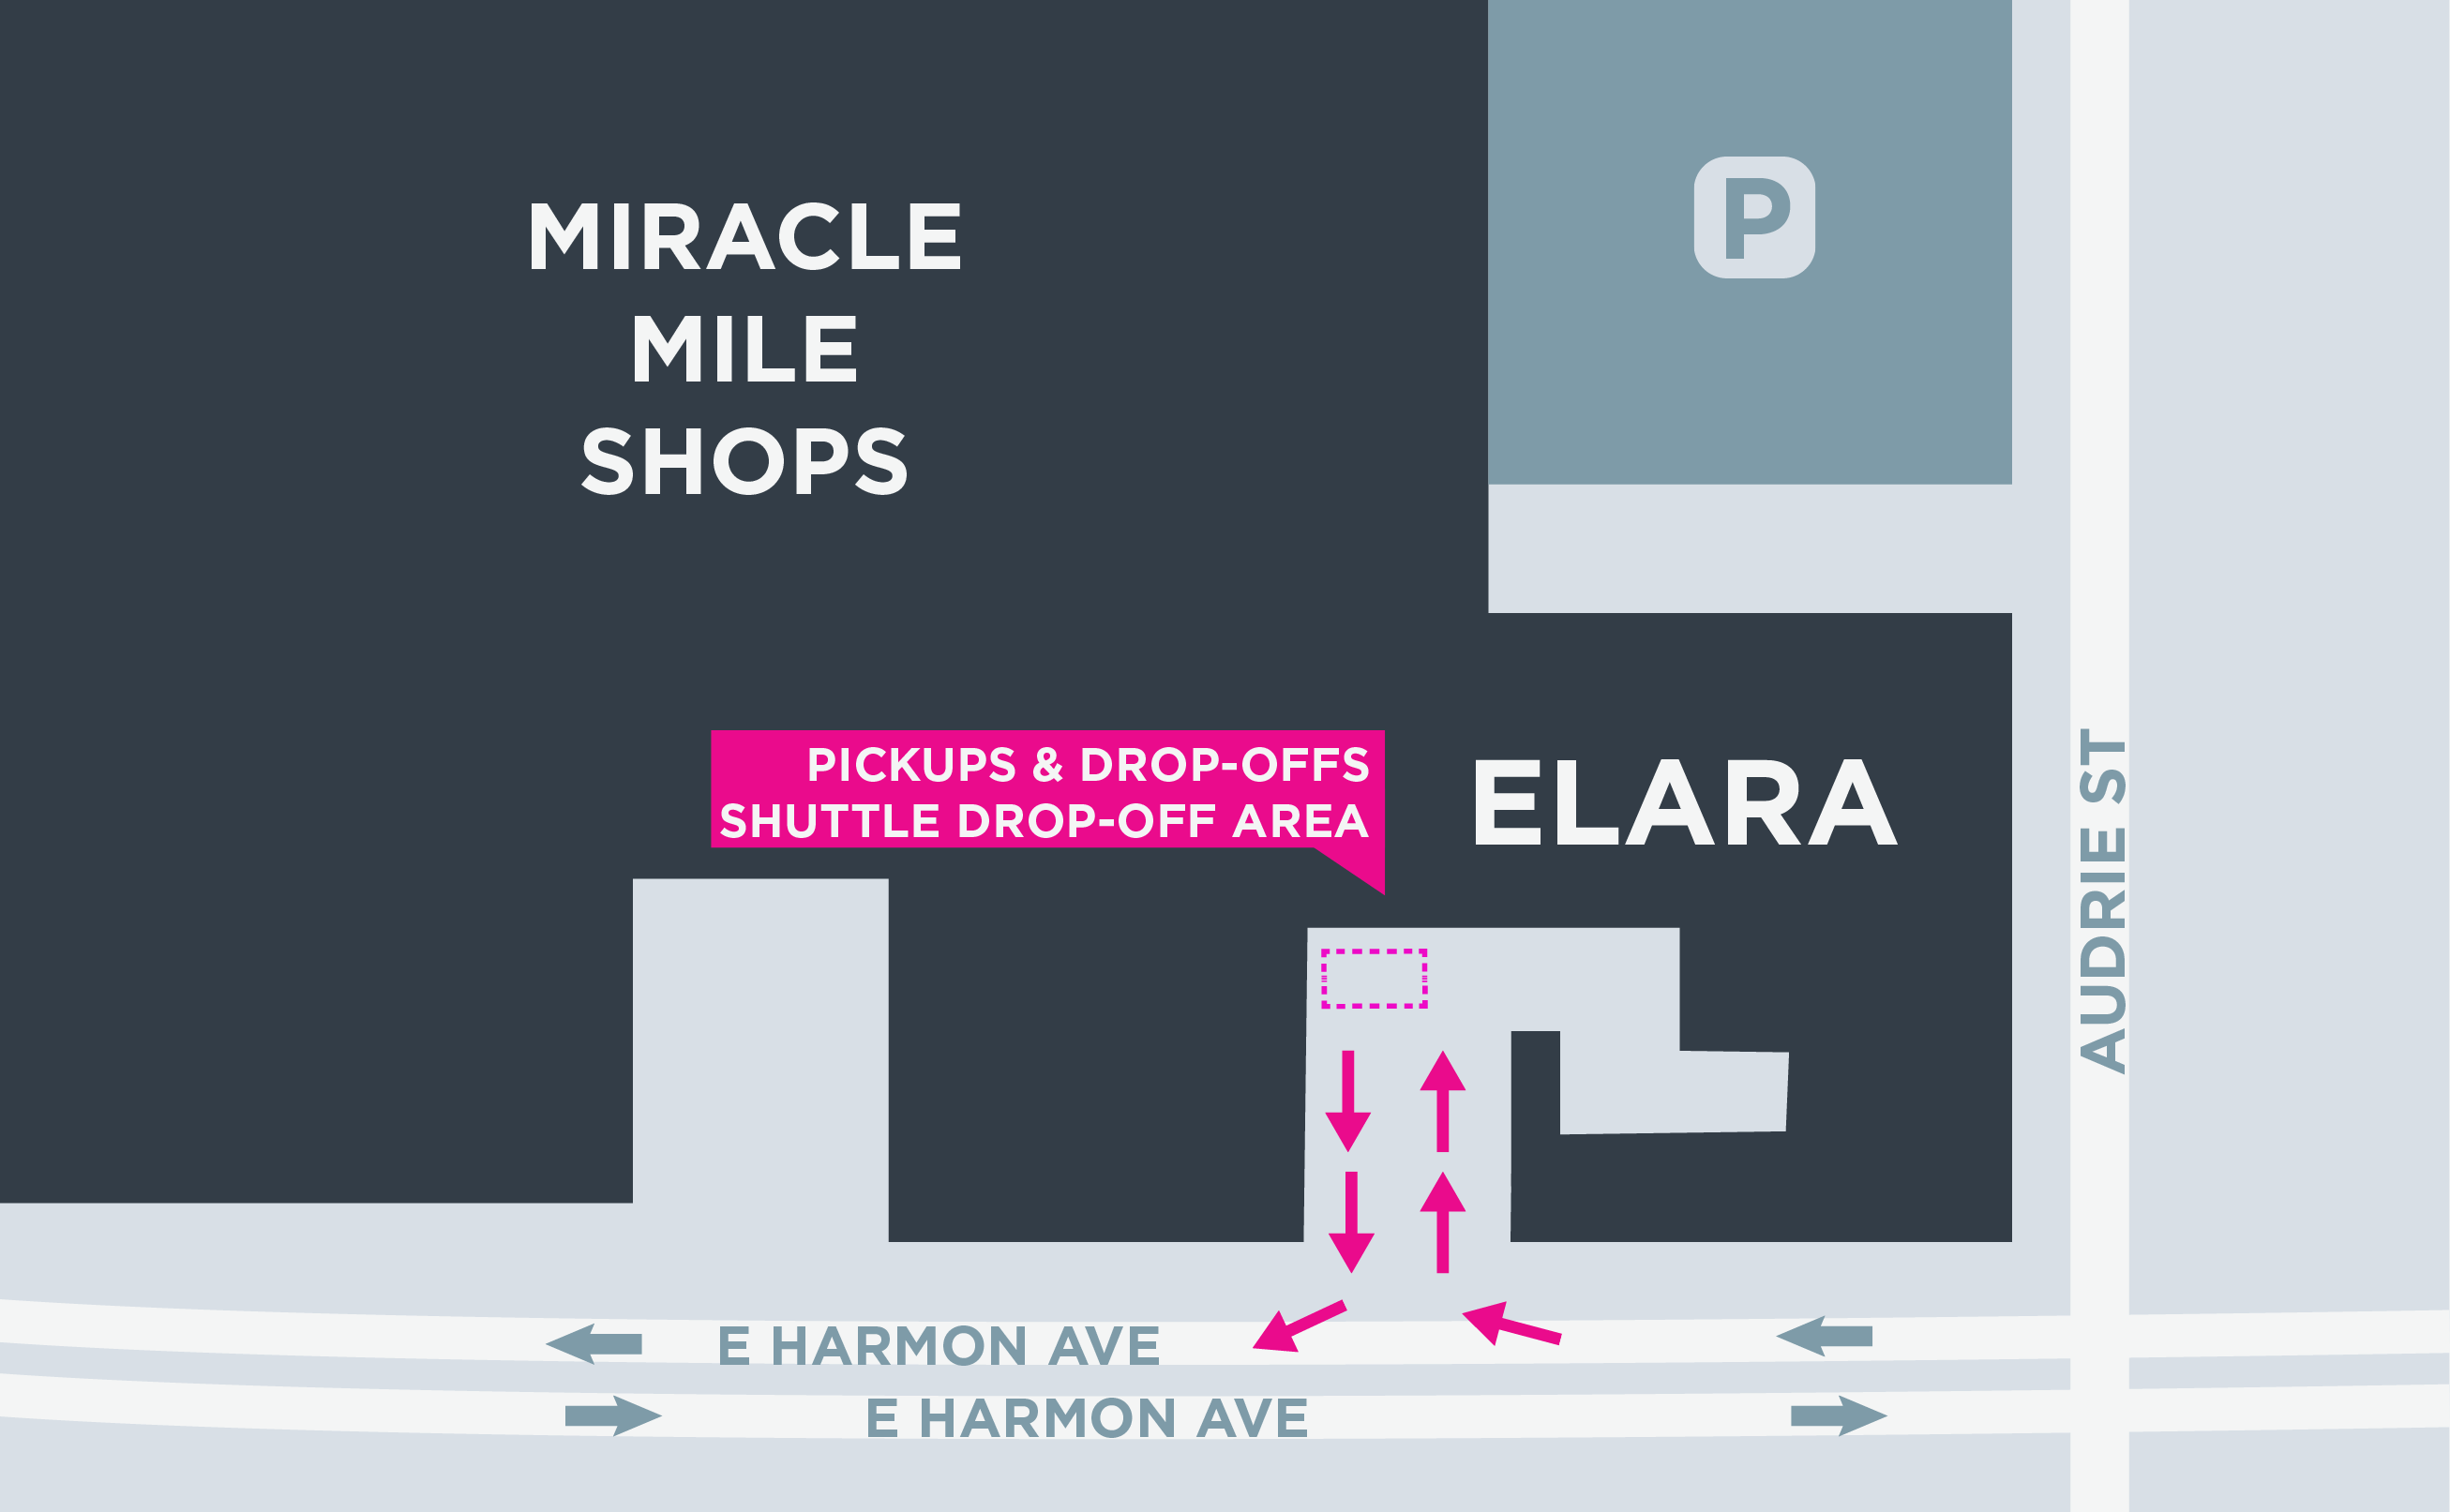 This image shows a map of the Elara, including pickup and dropoff areas.